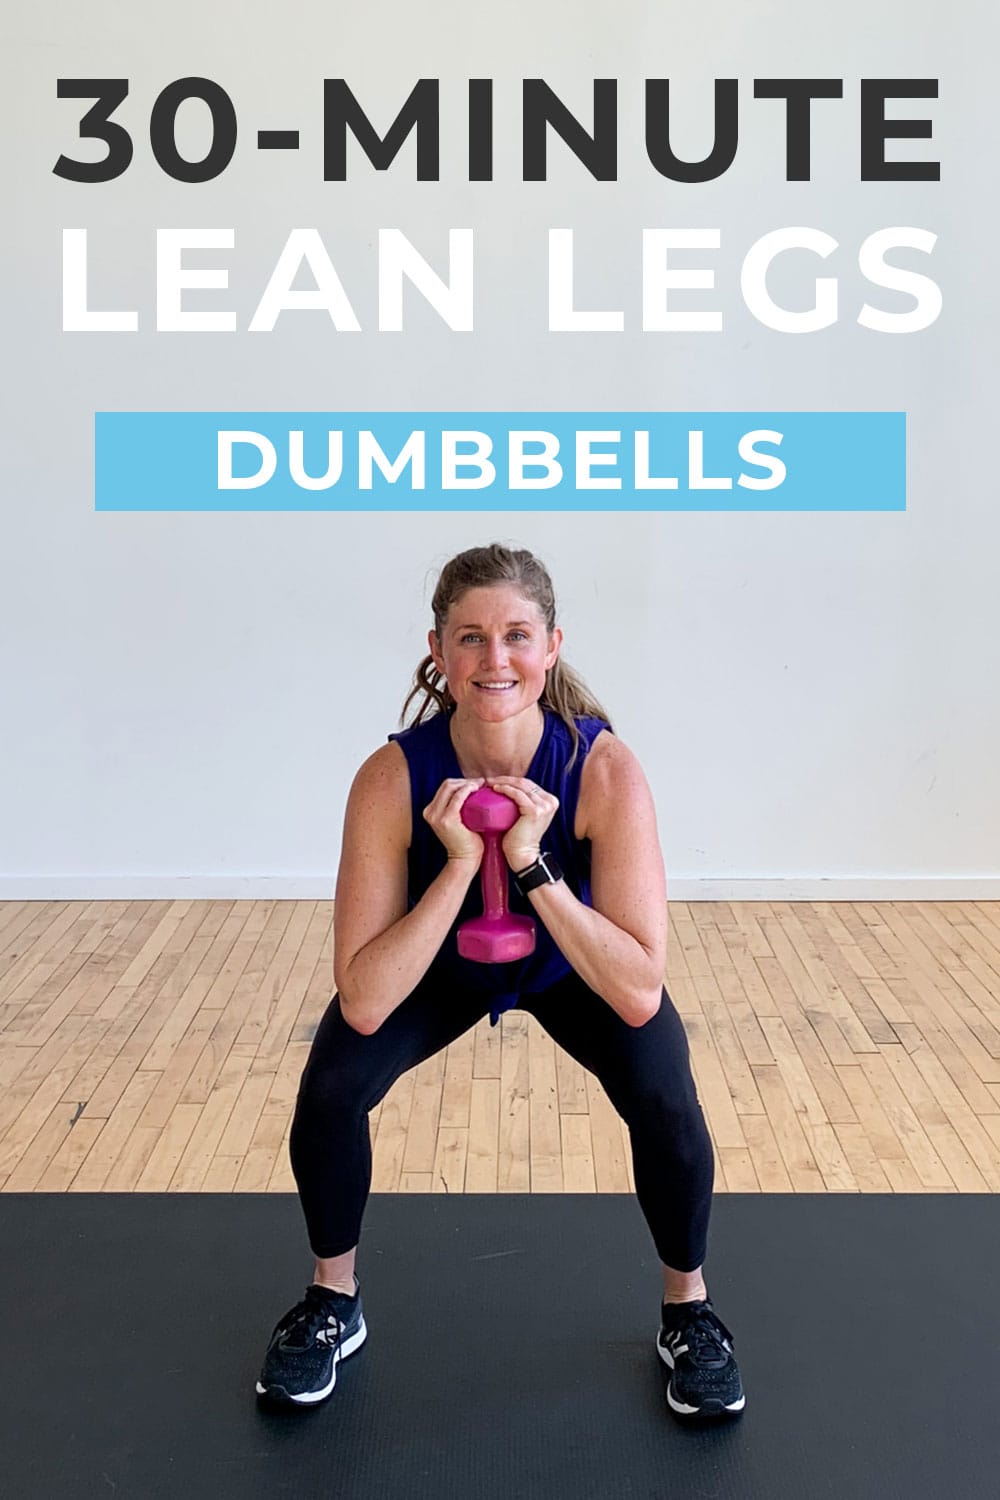 35-Minute Lower Body Dumbbell Workout | Nourish Move Love